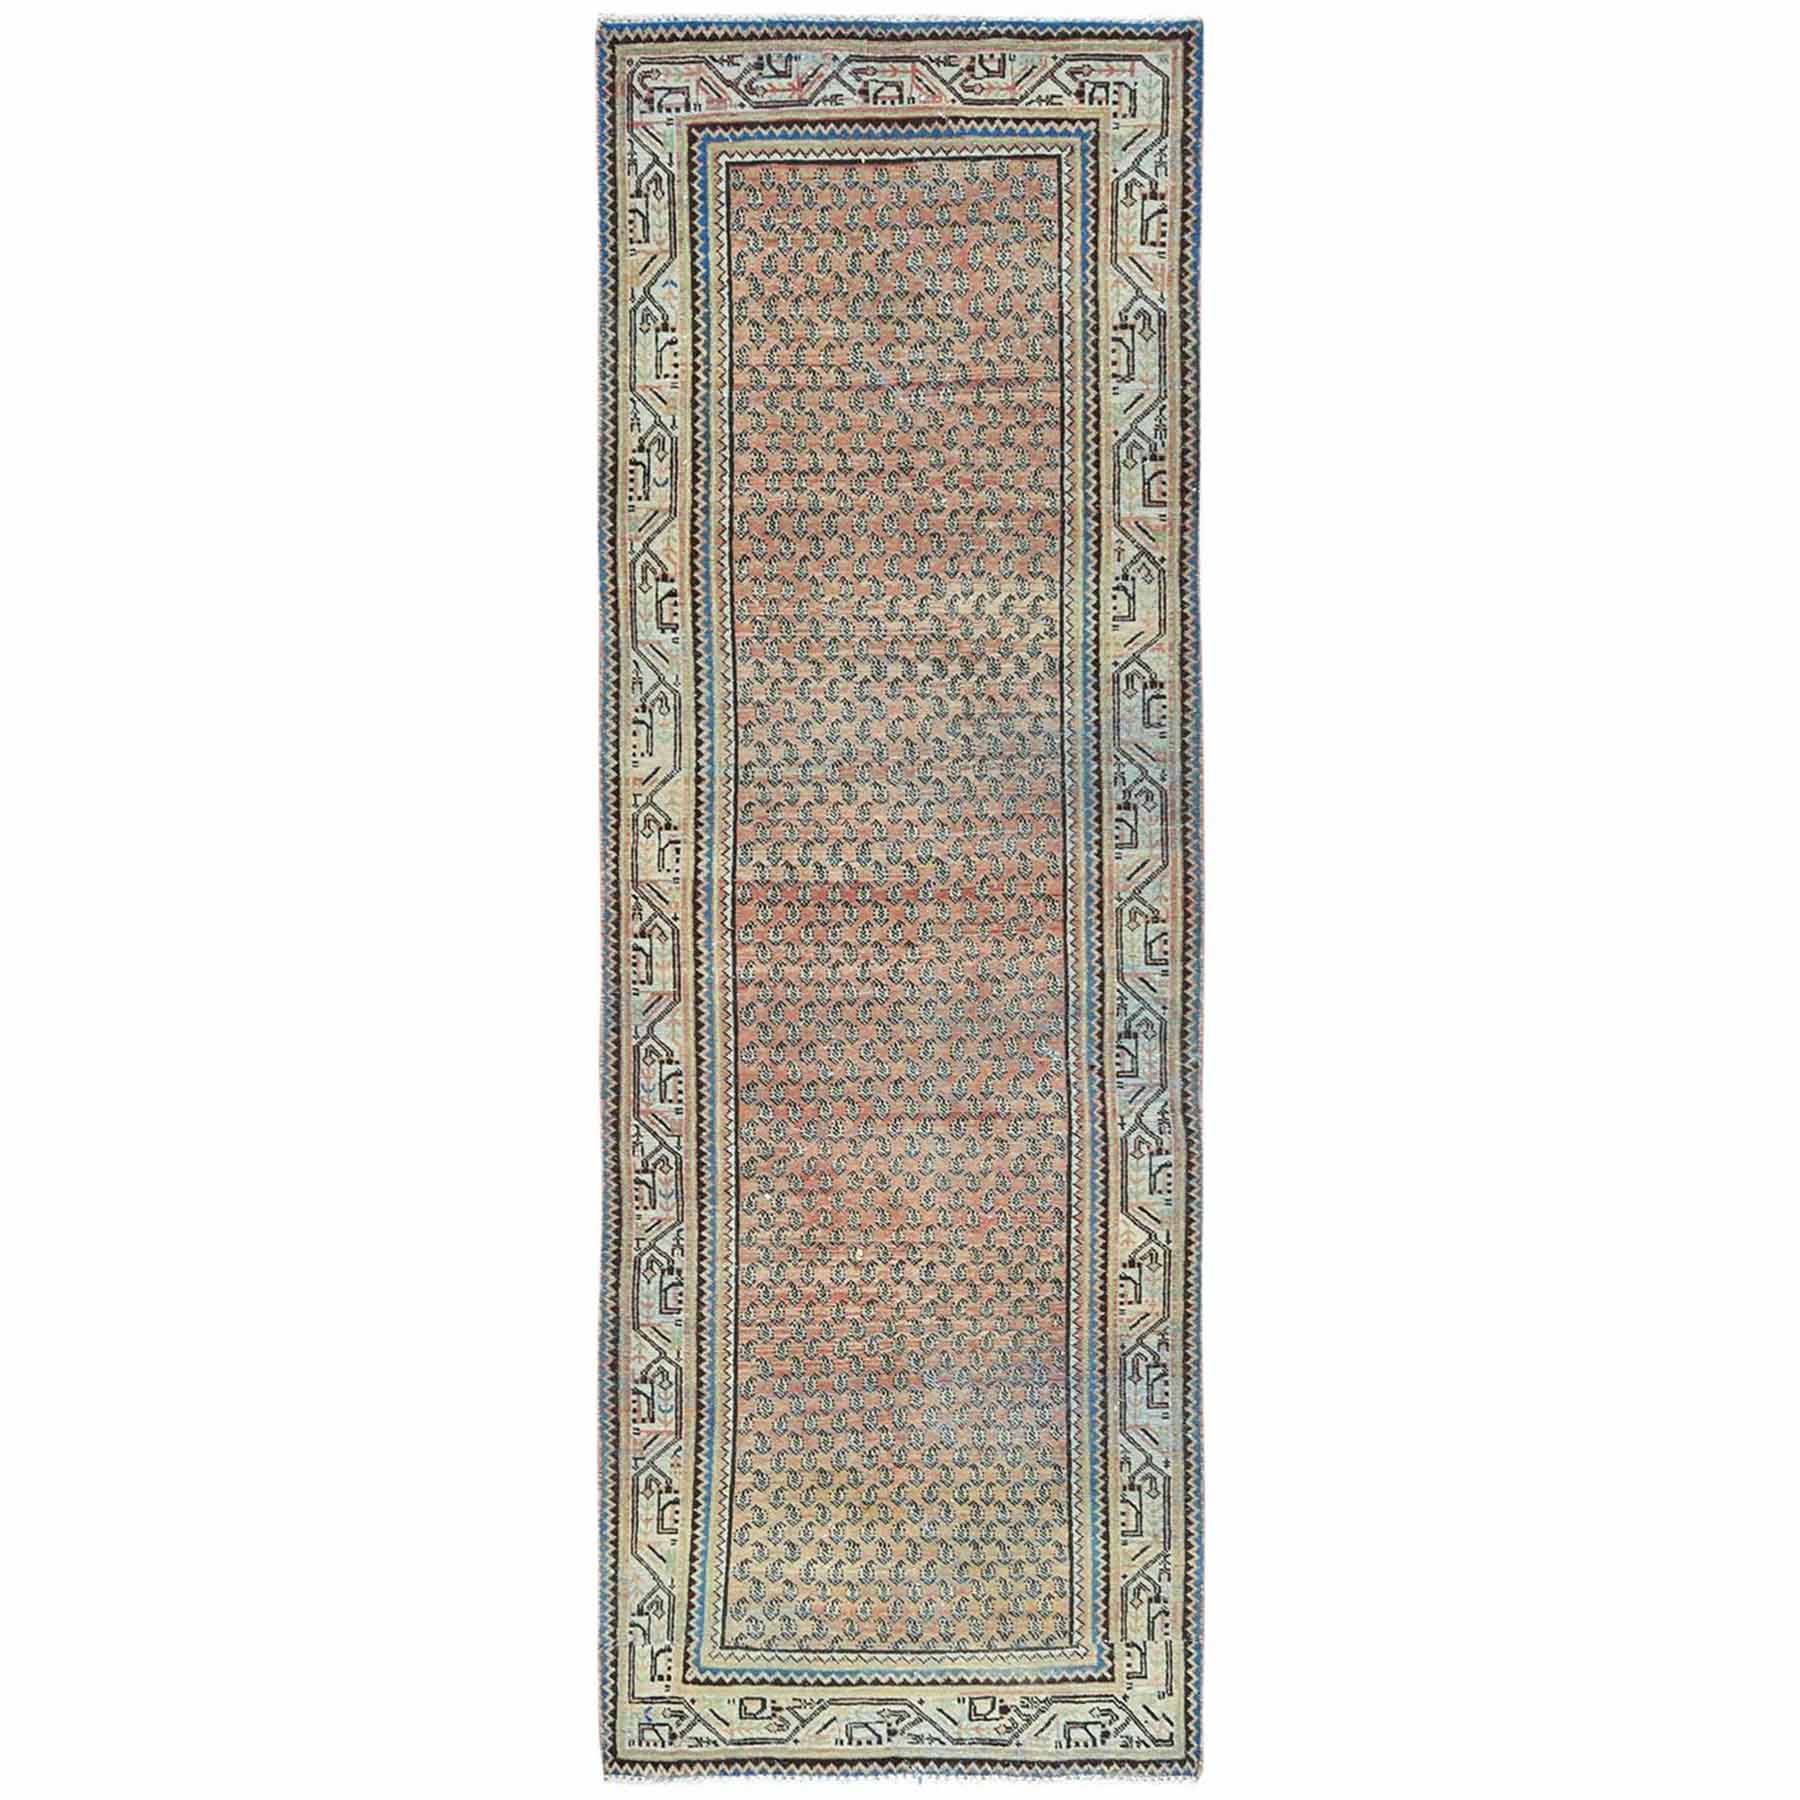 Overdyed-Vintage-Hand-Knotted-Rug-408230